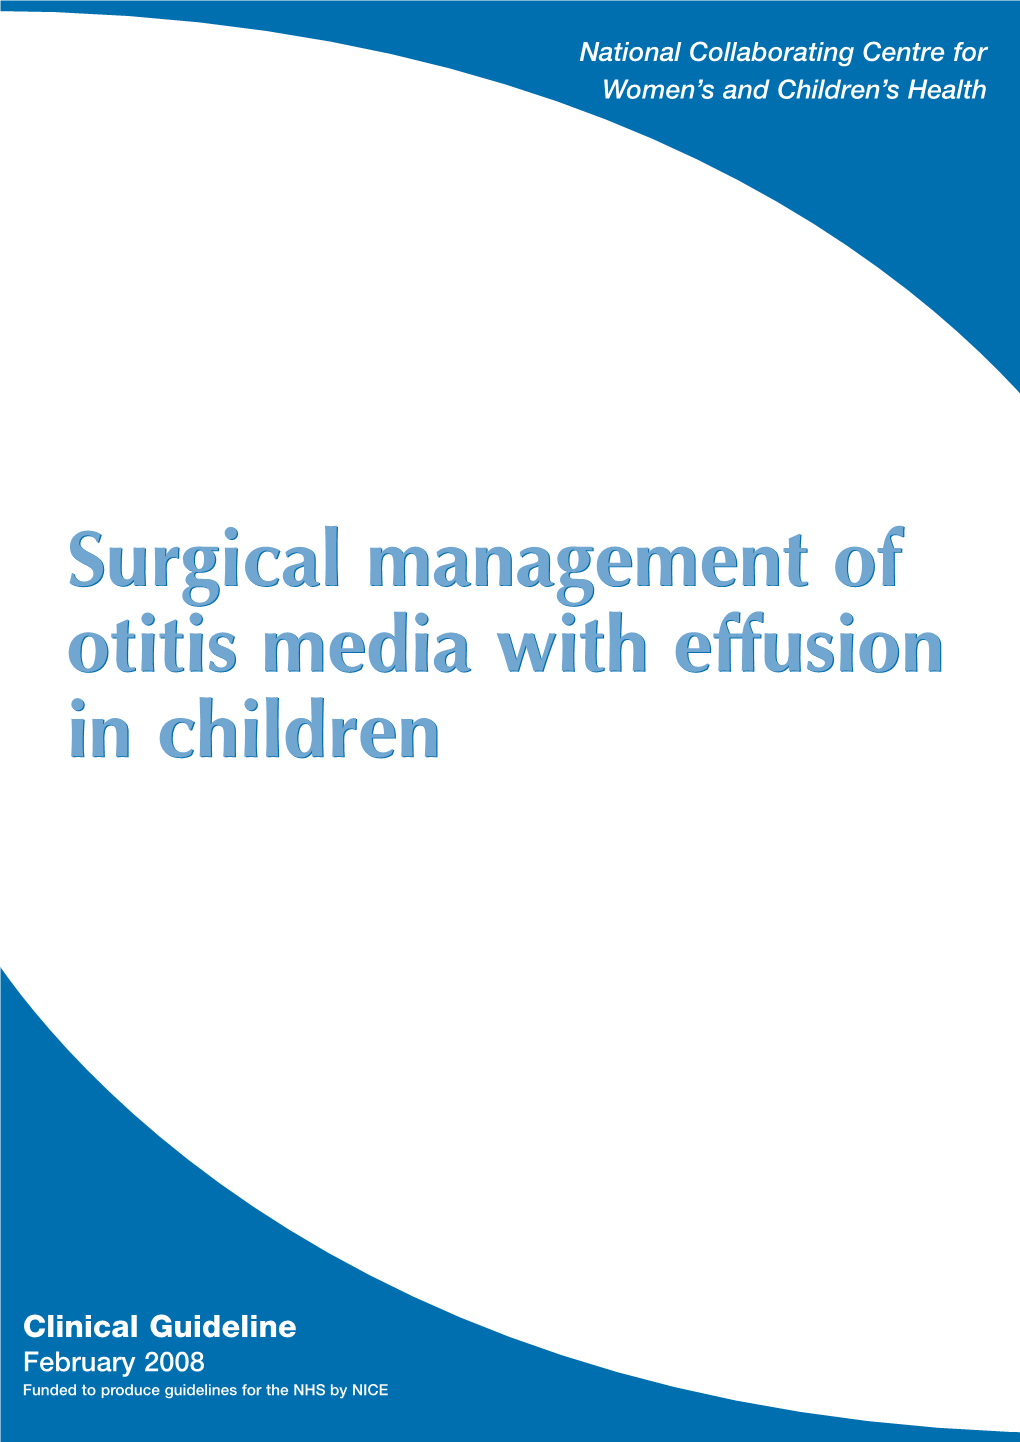 Surgical Management of Otitis Media with Effusion in Children